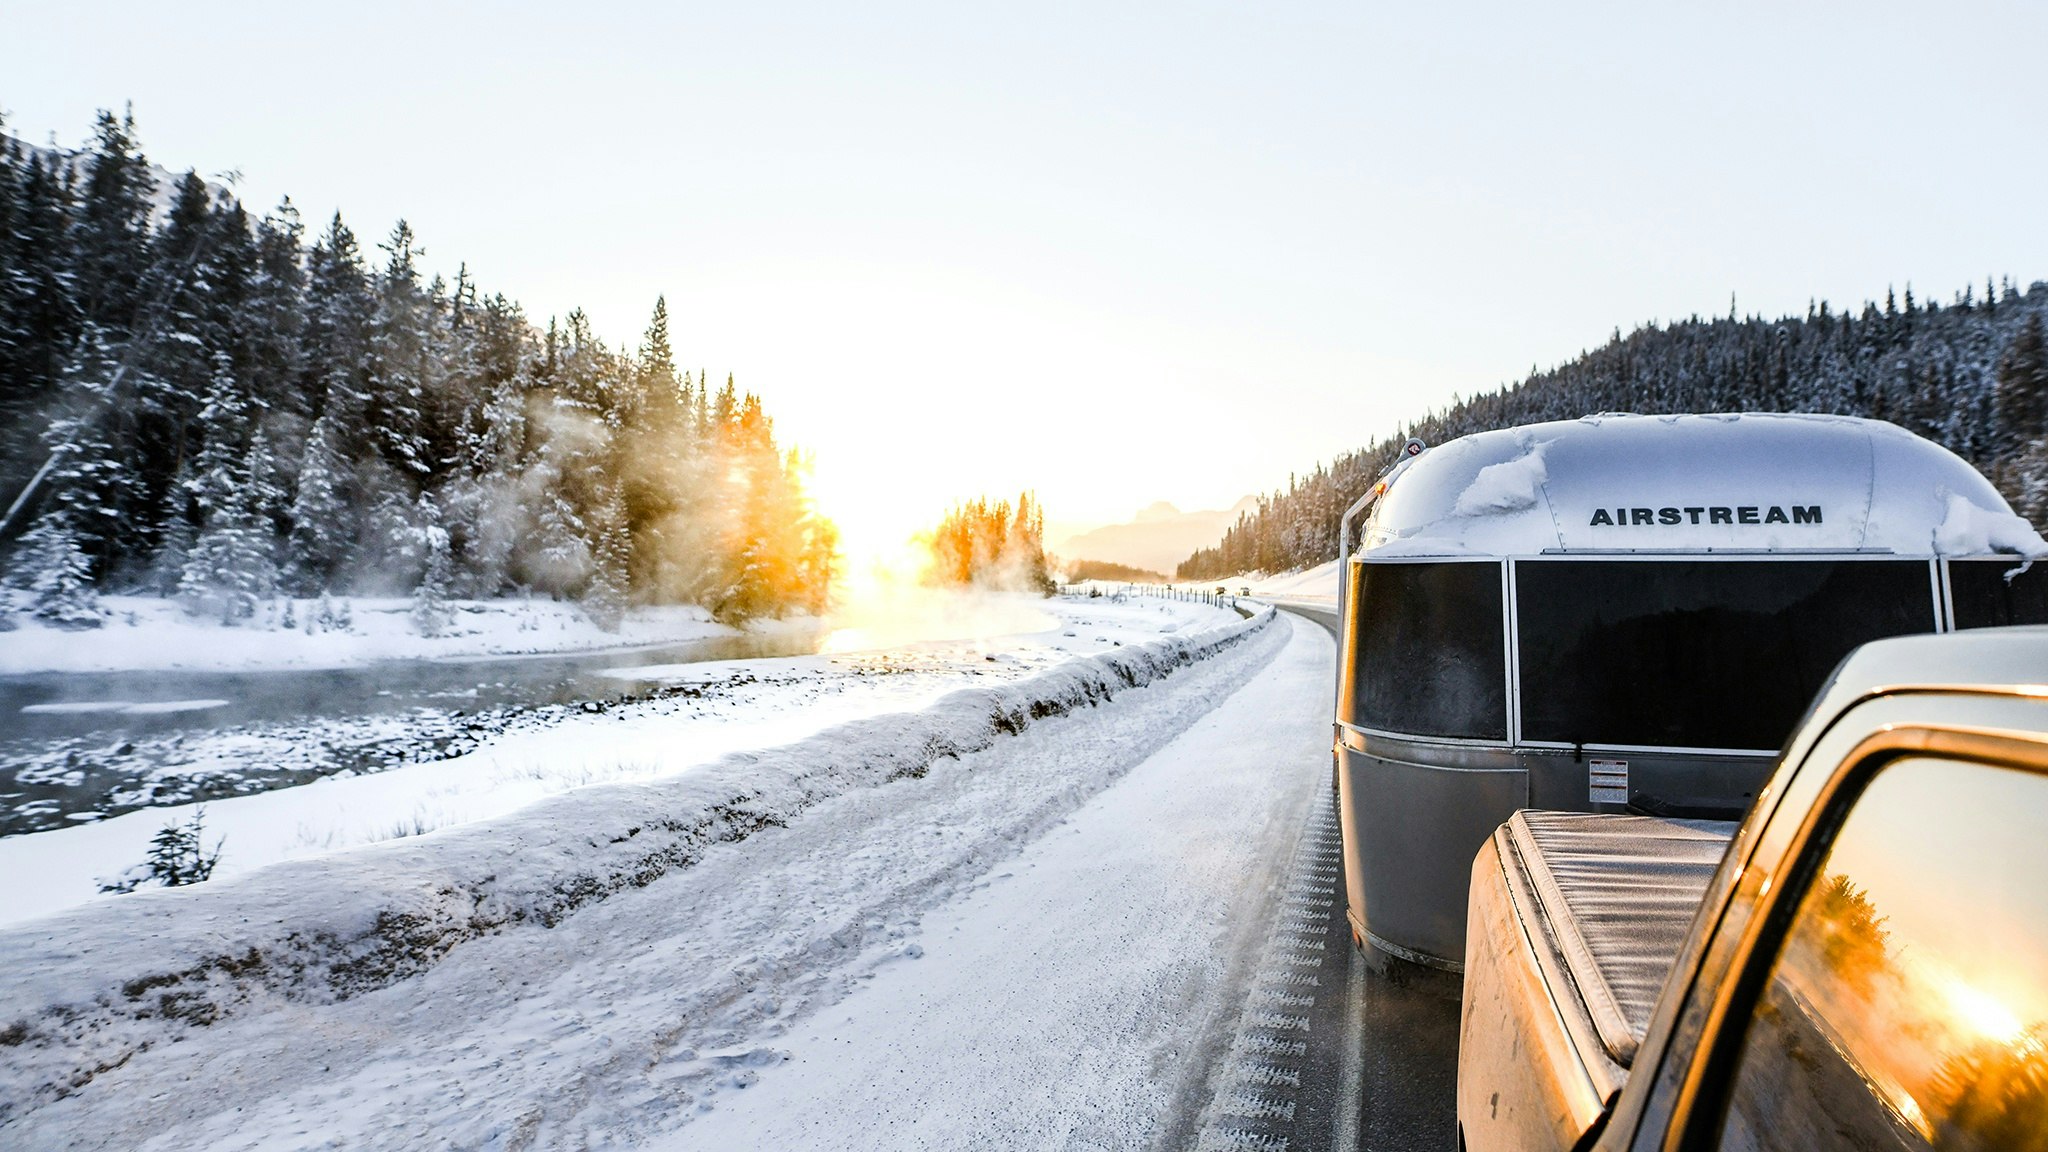 Airstream Travel Trailer Pickup Truck Winter Towing Snow